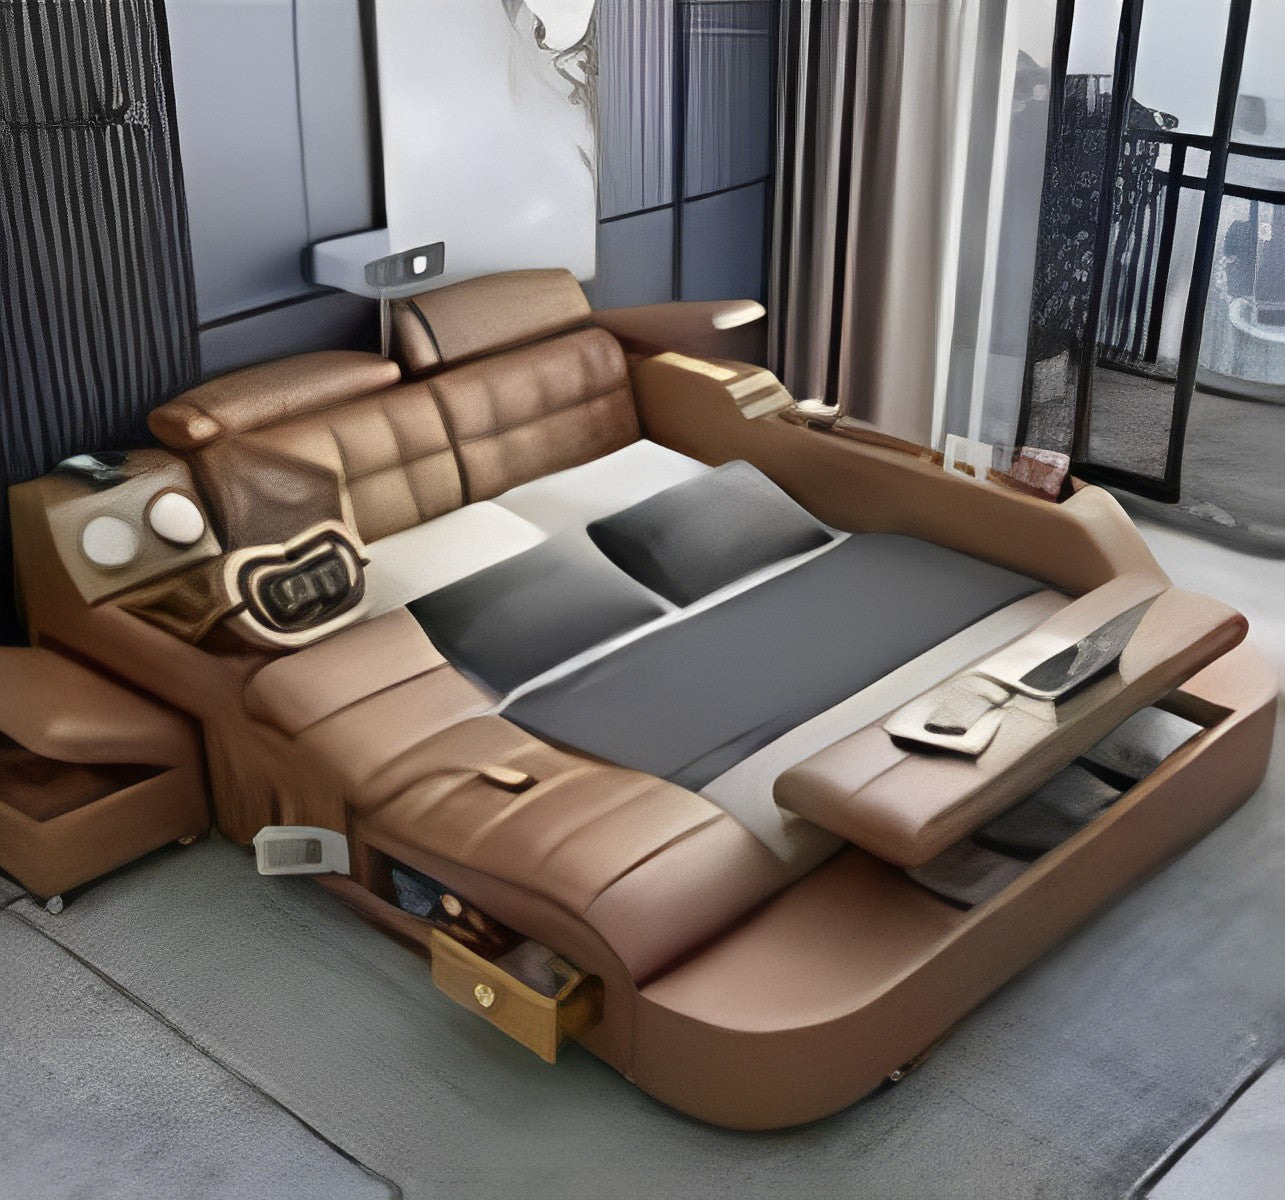 Smart Bed King Size 180 * 200